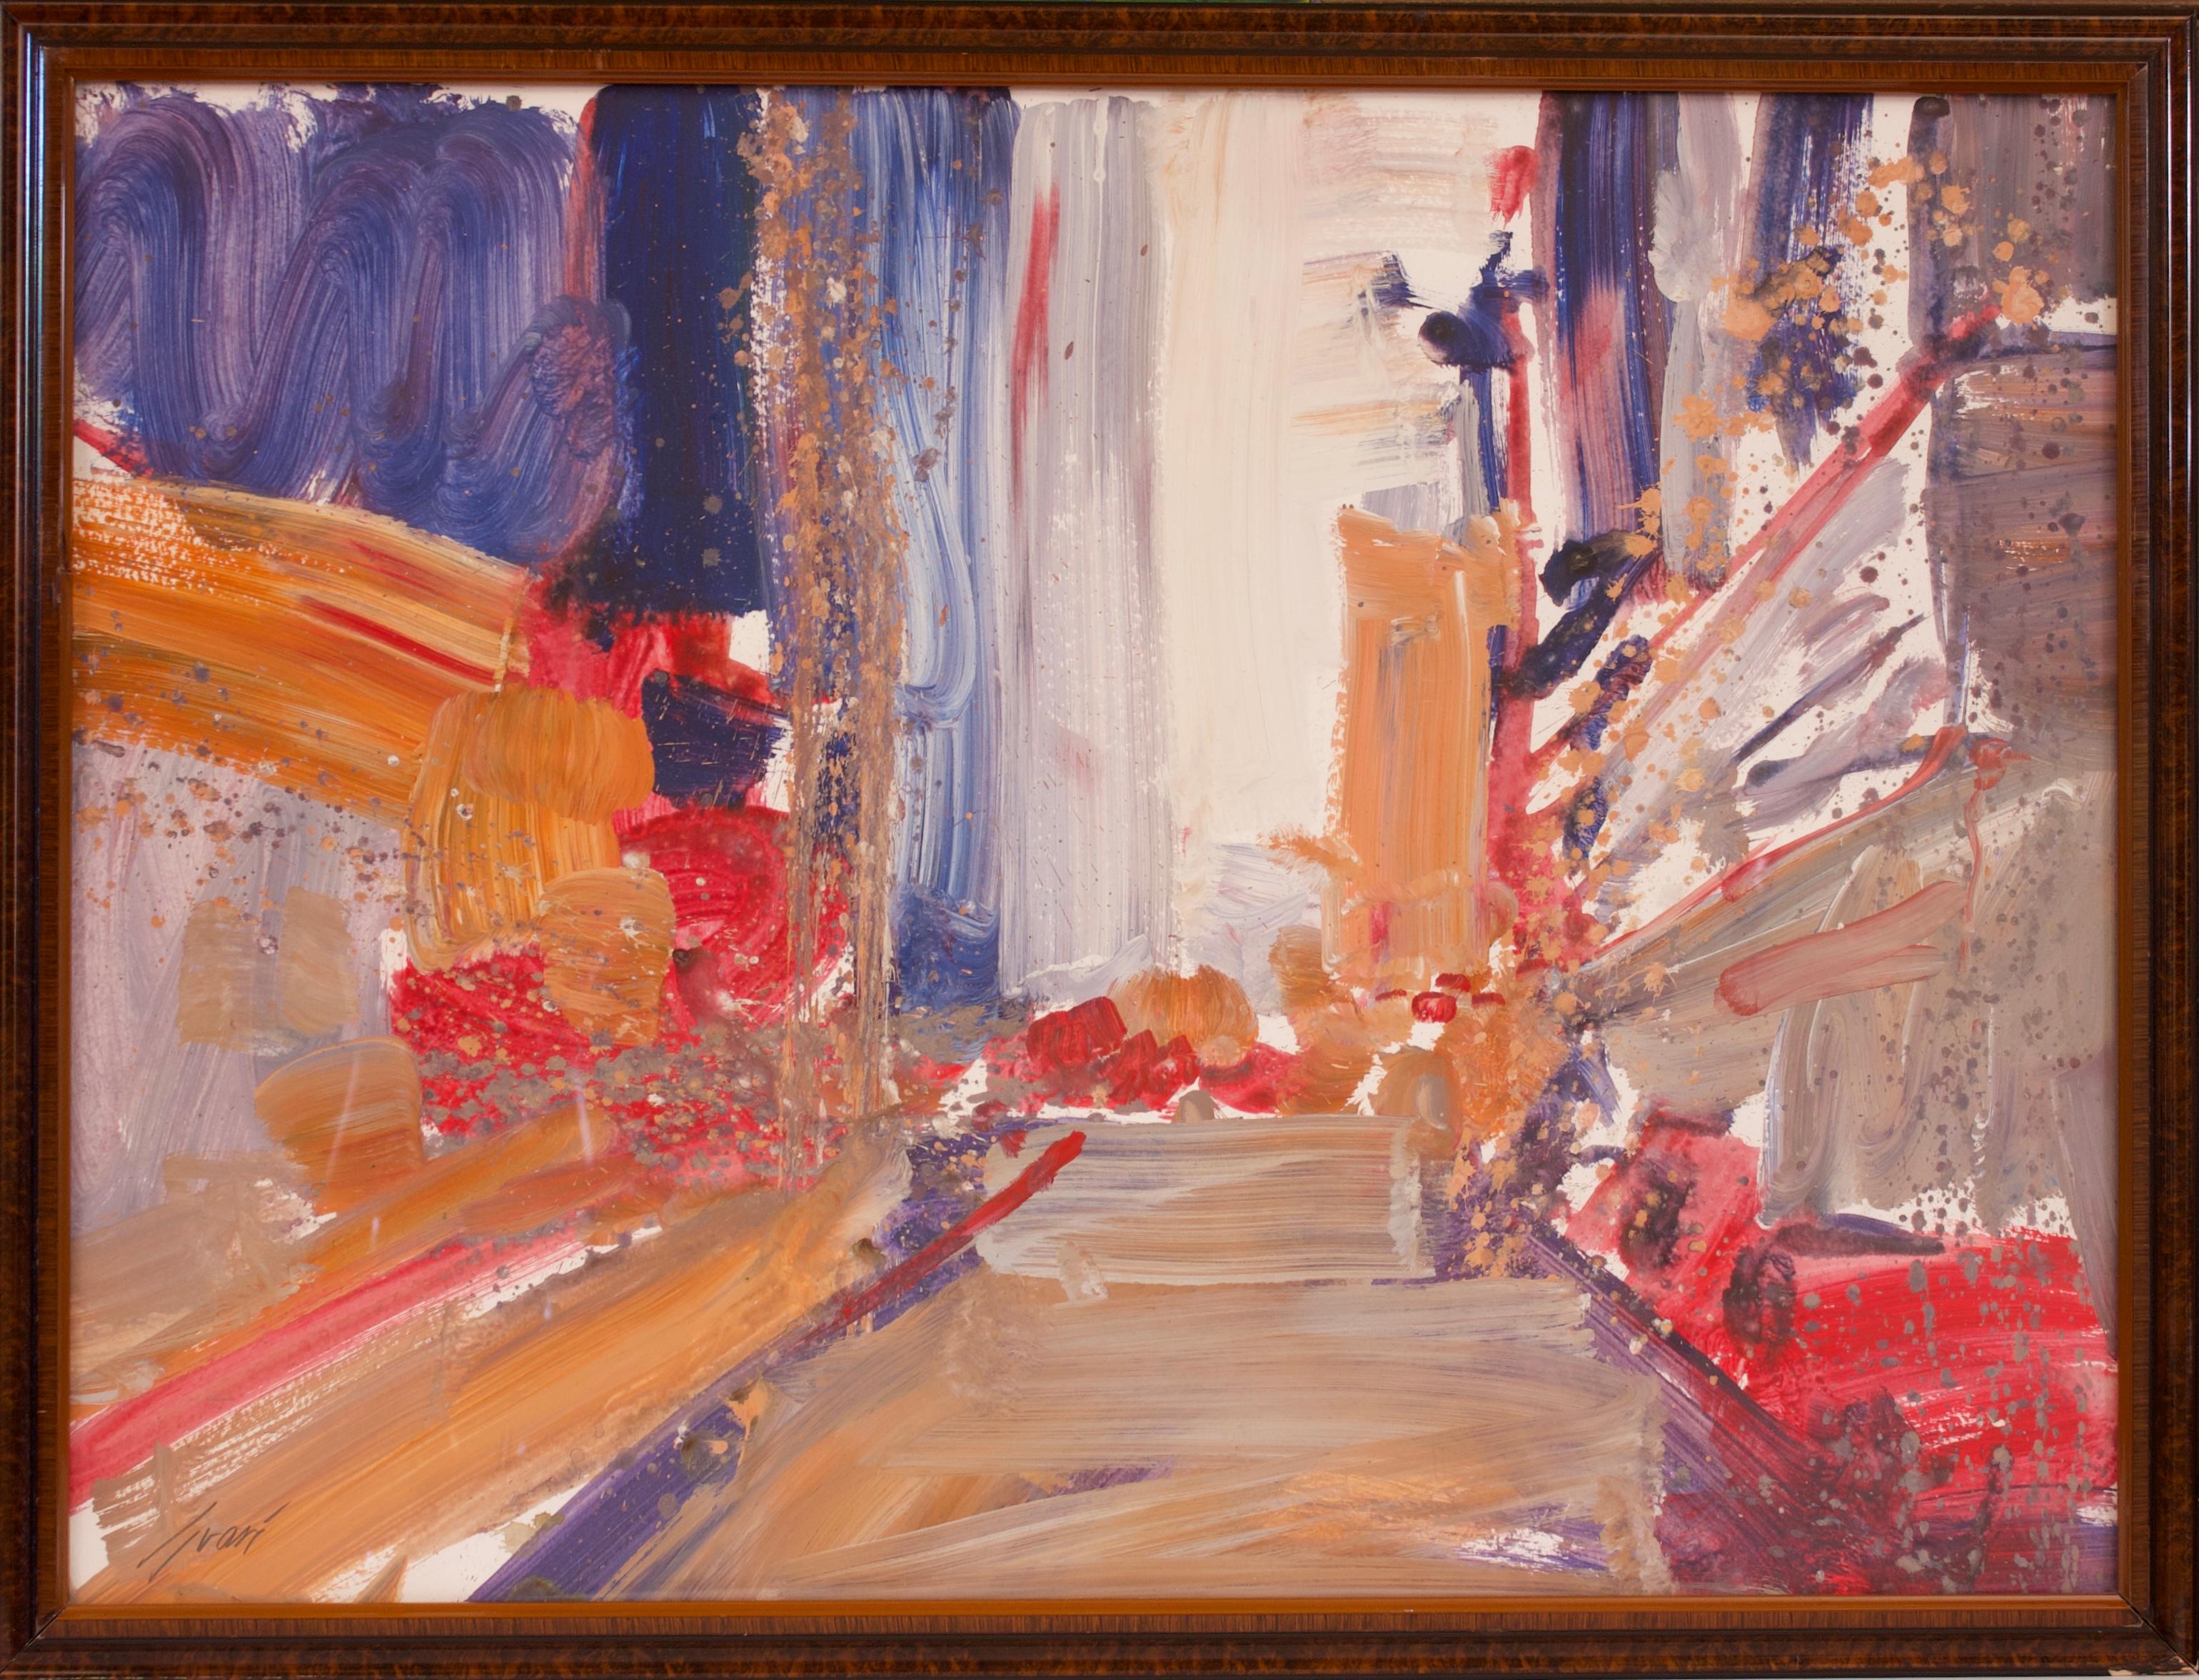 Congress Ave (I) - Painting by Pep Suari